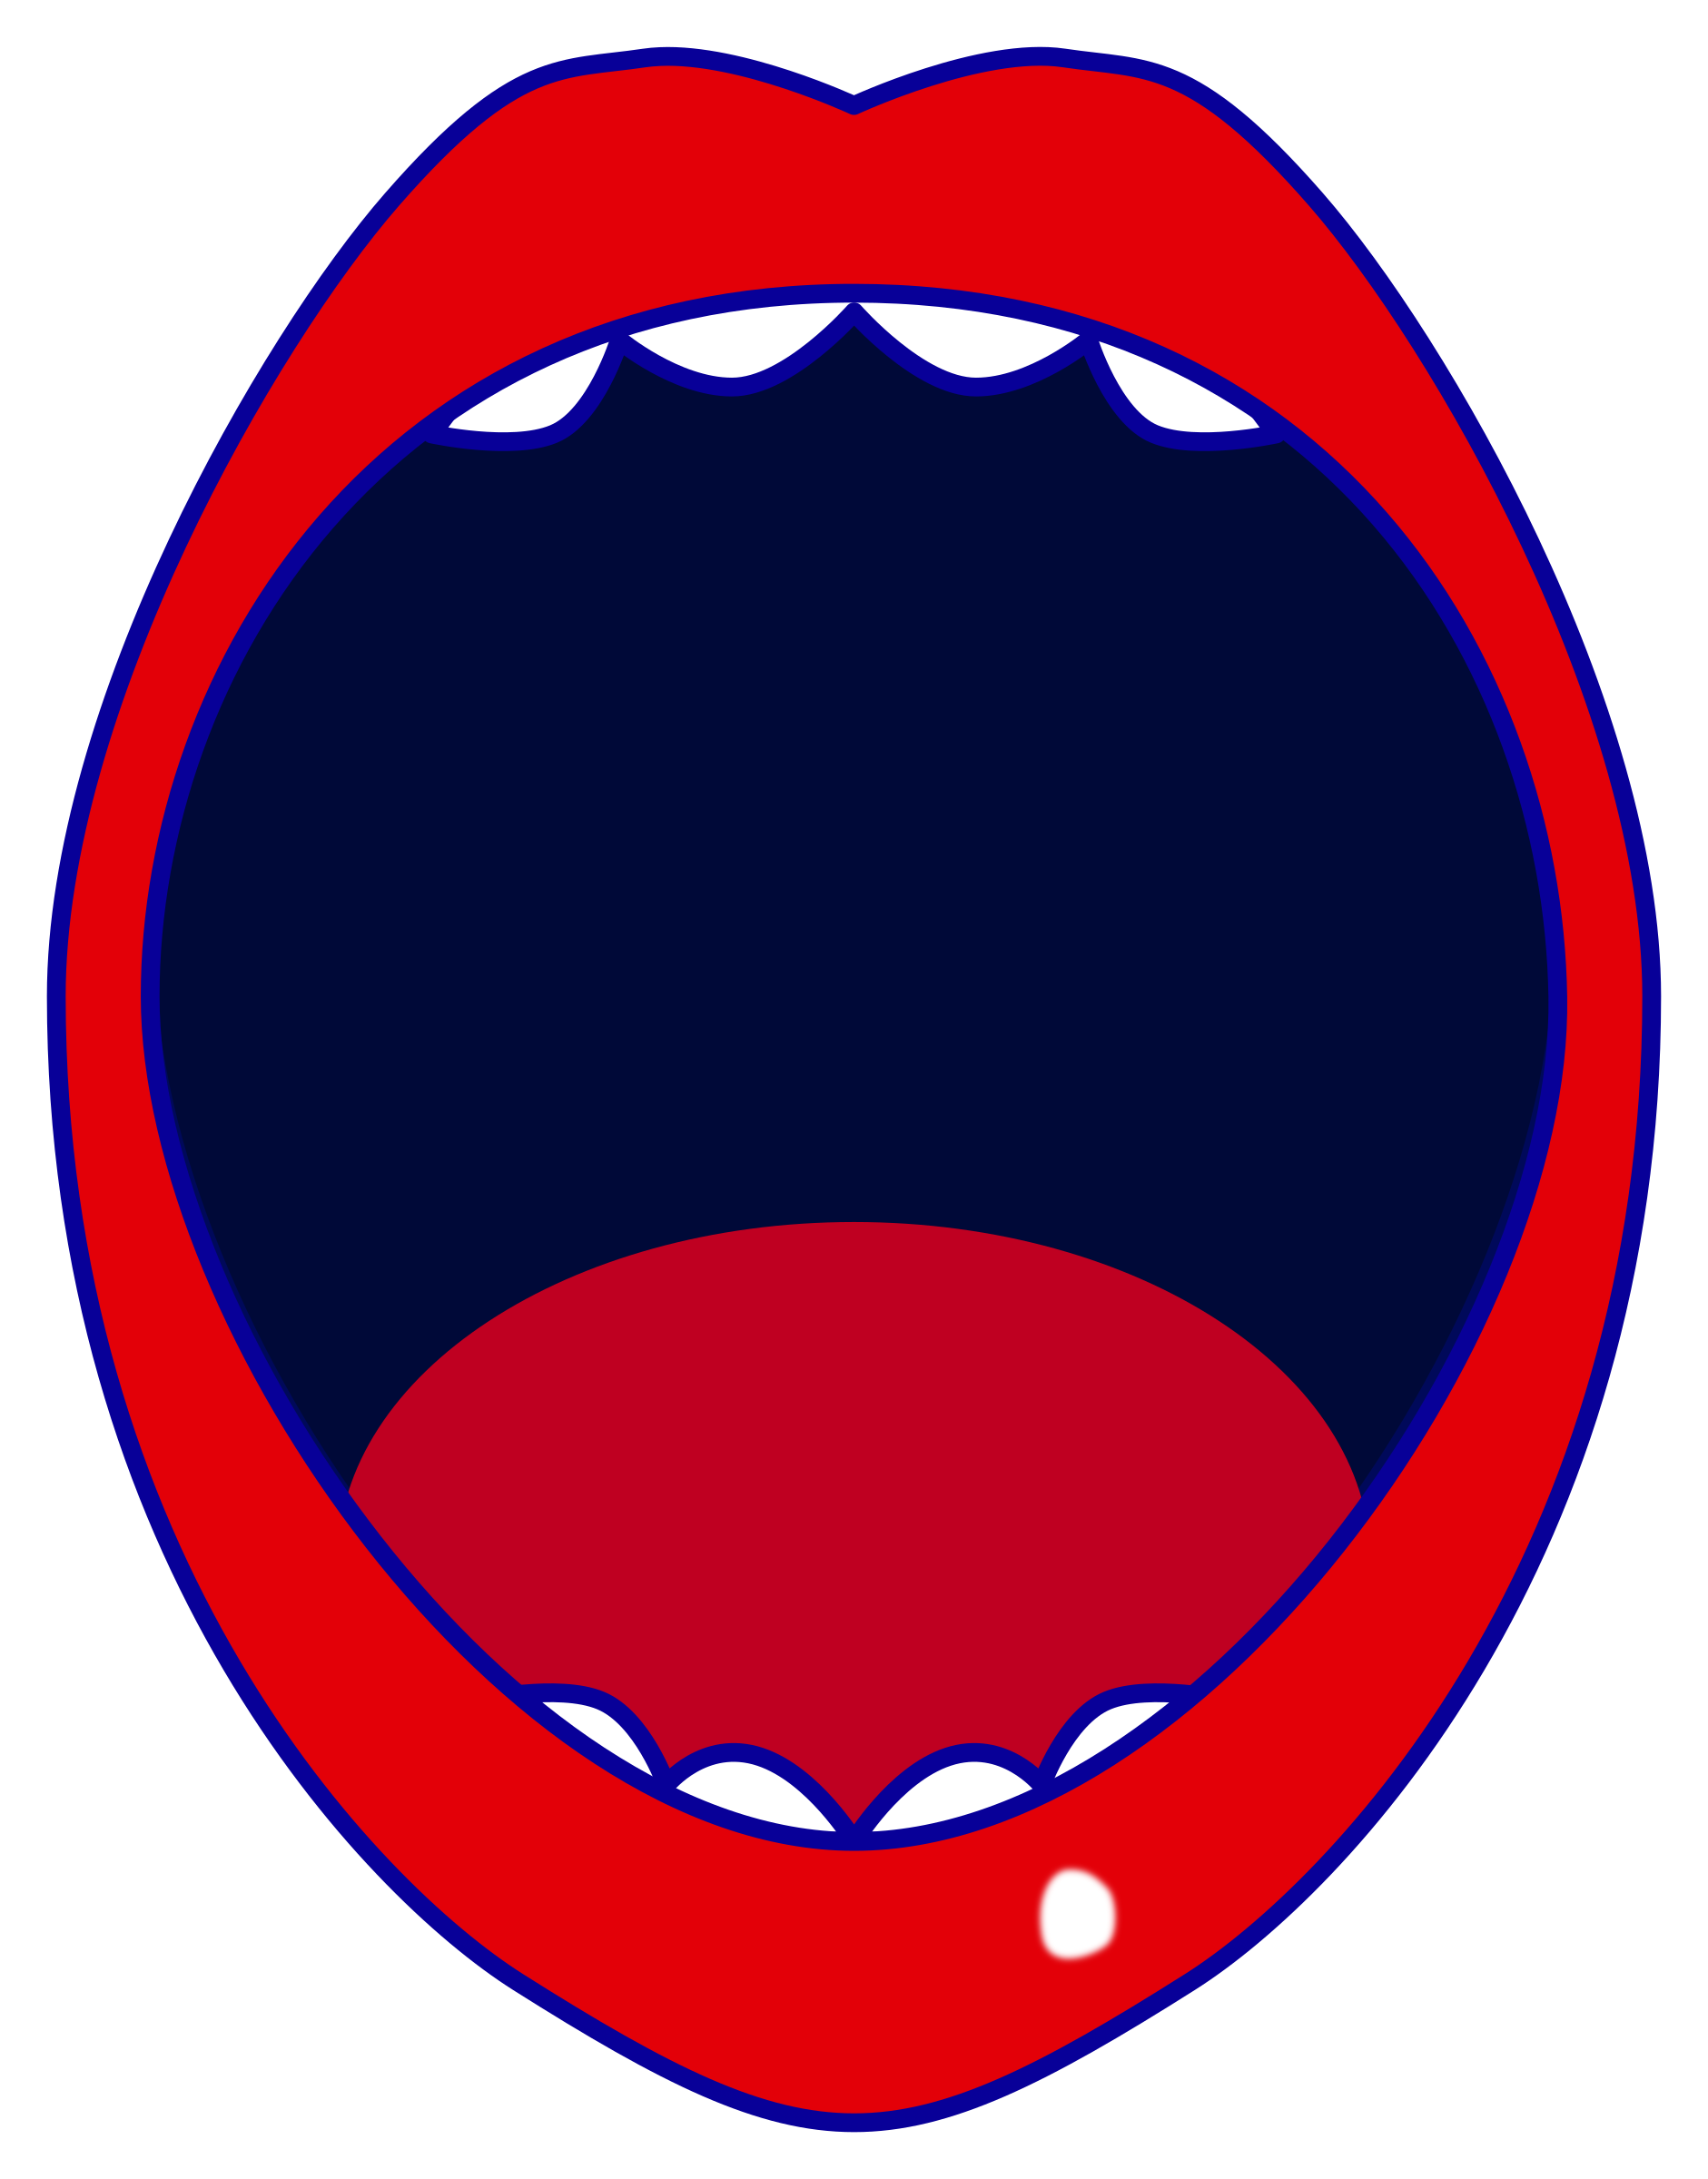 Clipart red open mouth